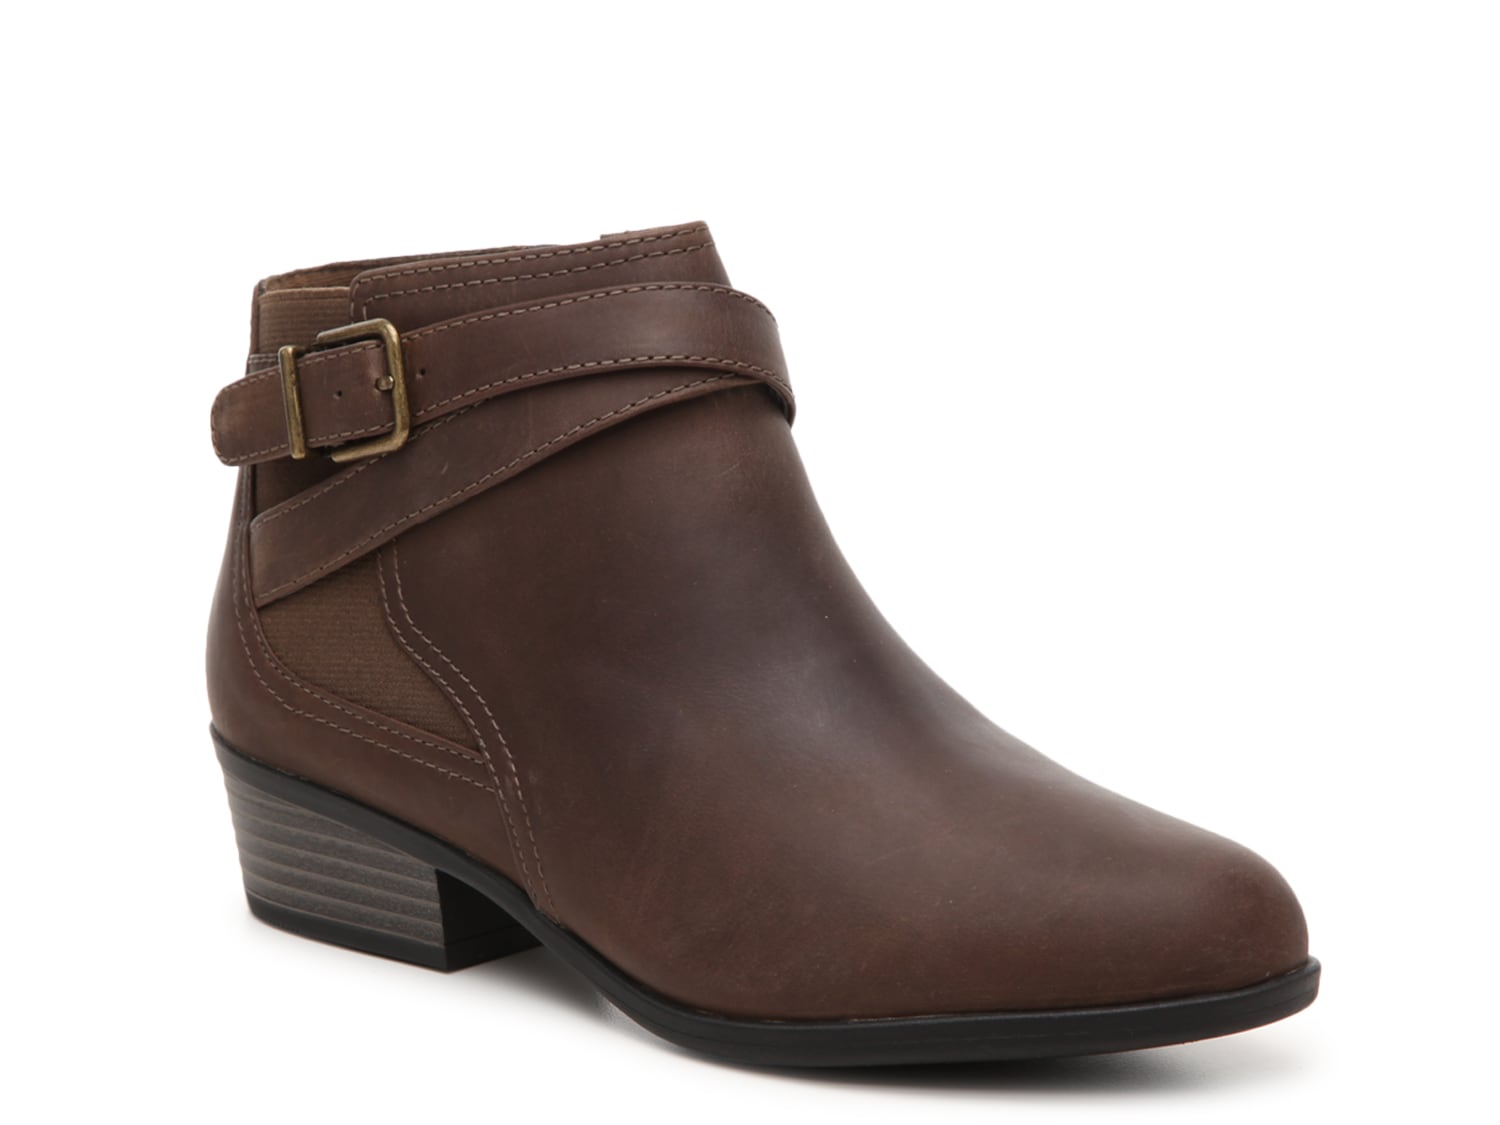 Clarks Addiy Holly Bootie Women's Shoes | DSW